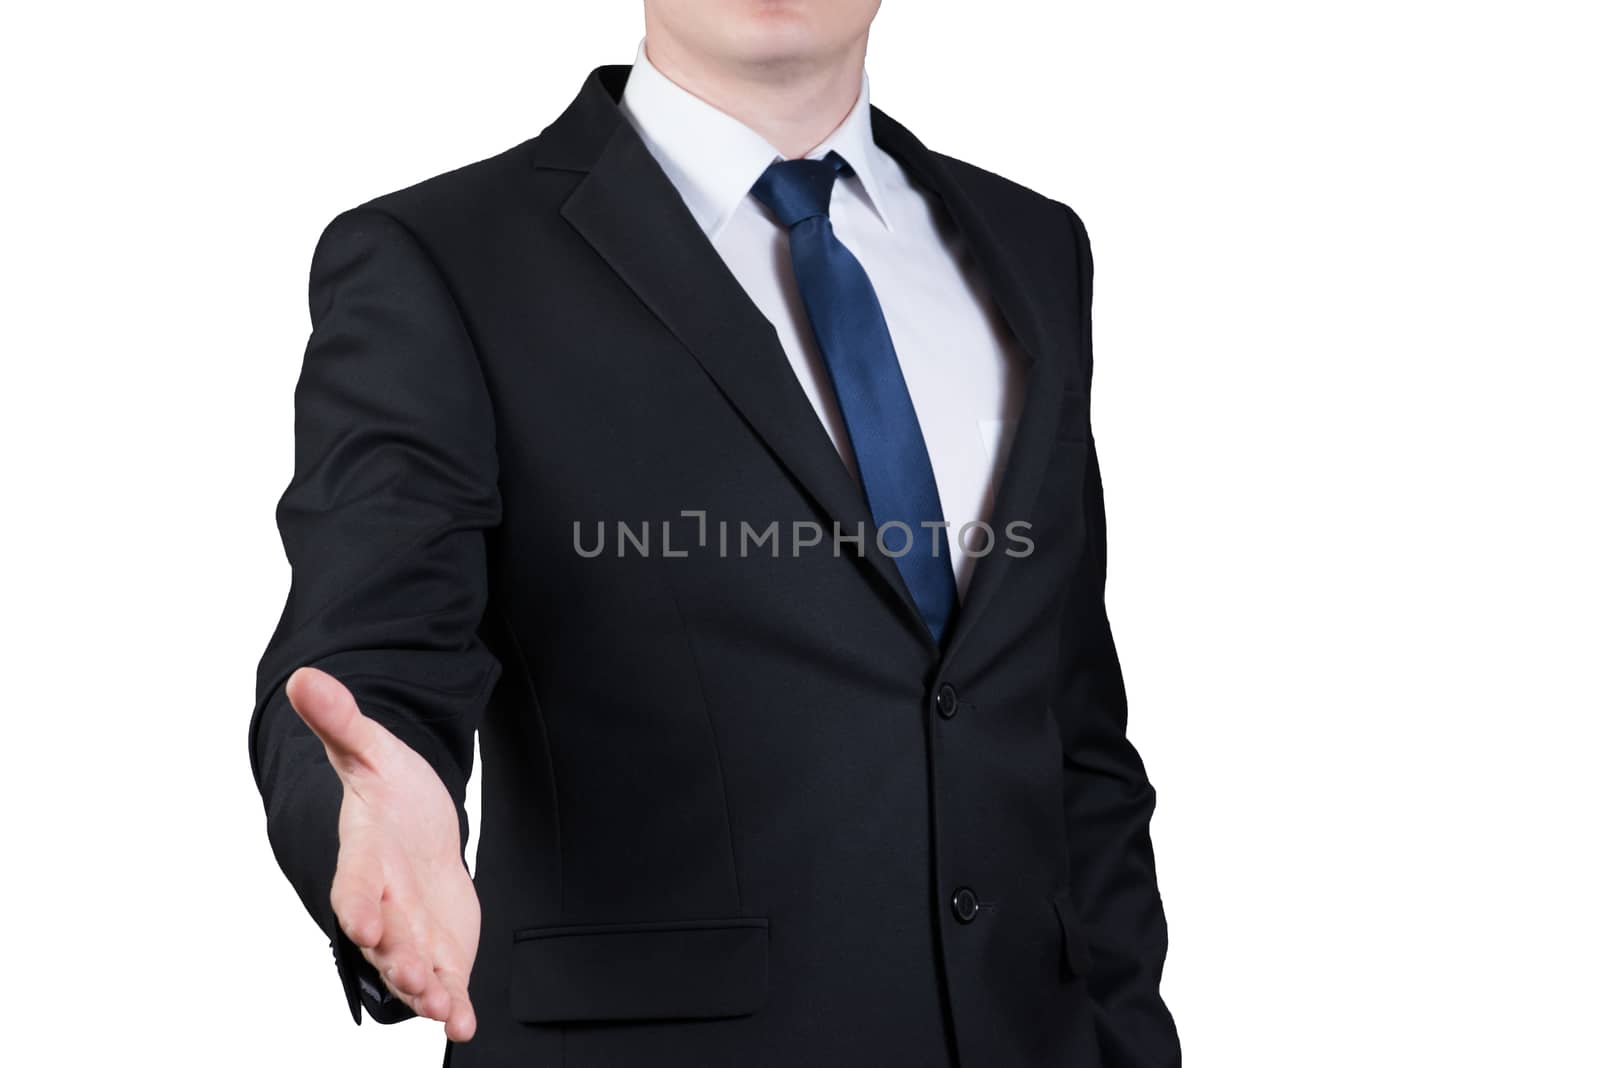 successful businessman stretches out hand for handshake, isolated on white by claire_lucia